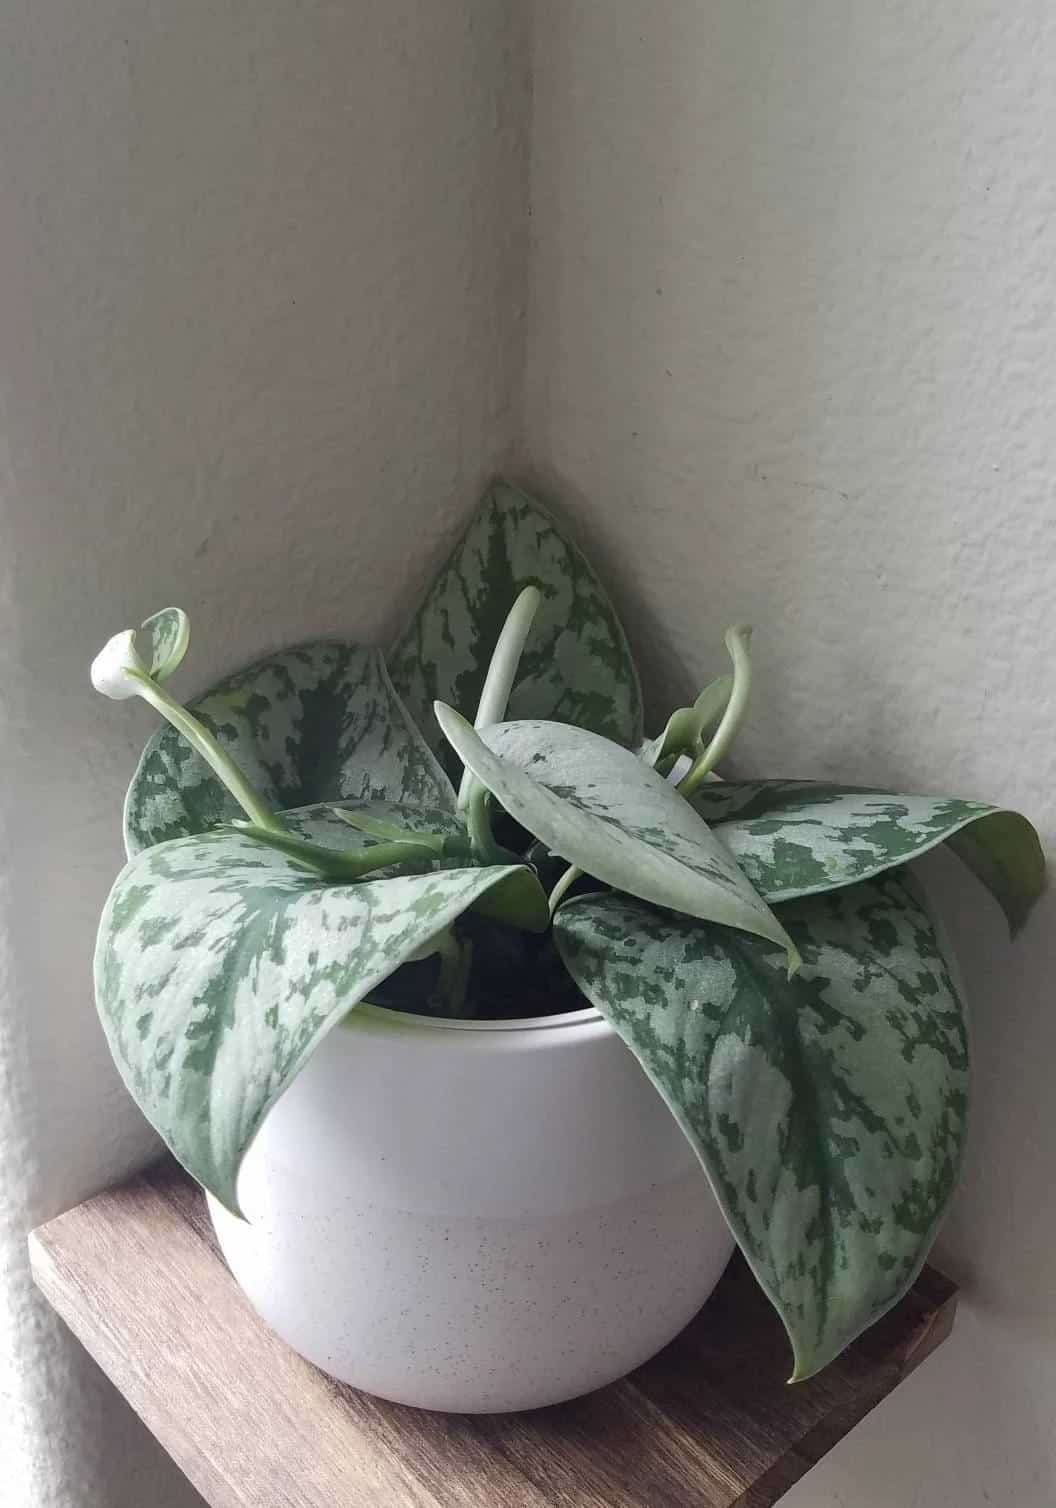 money plant parenting- types images, benefits, Vastu & tips for growth in water with buying & decor option